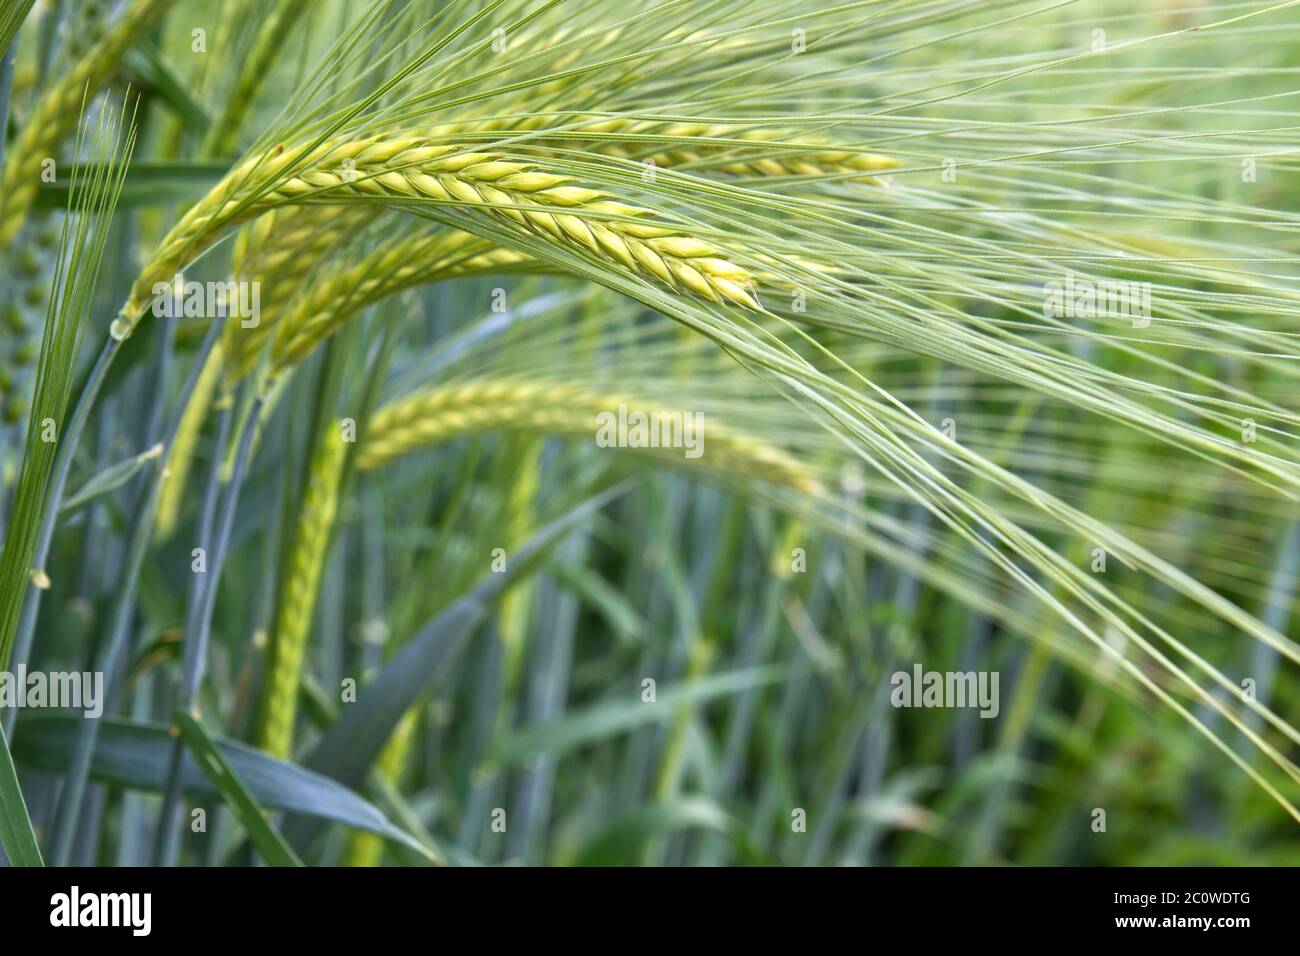 agriculture farming barley barley field infield grain cereal food aliment Stock Photo